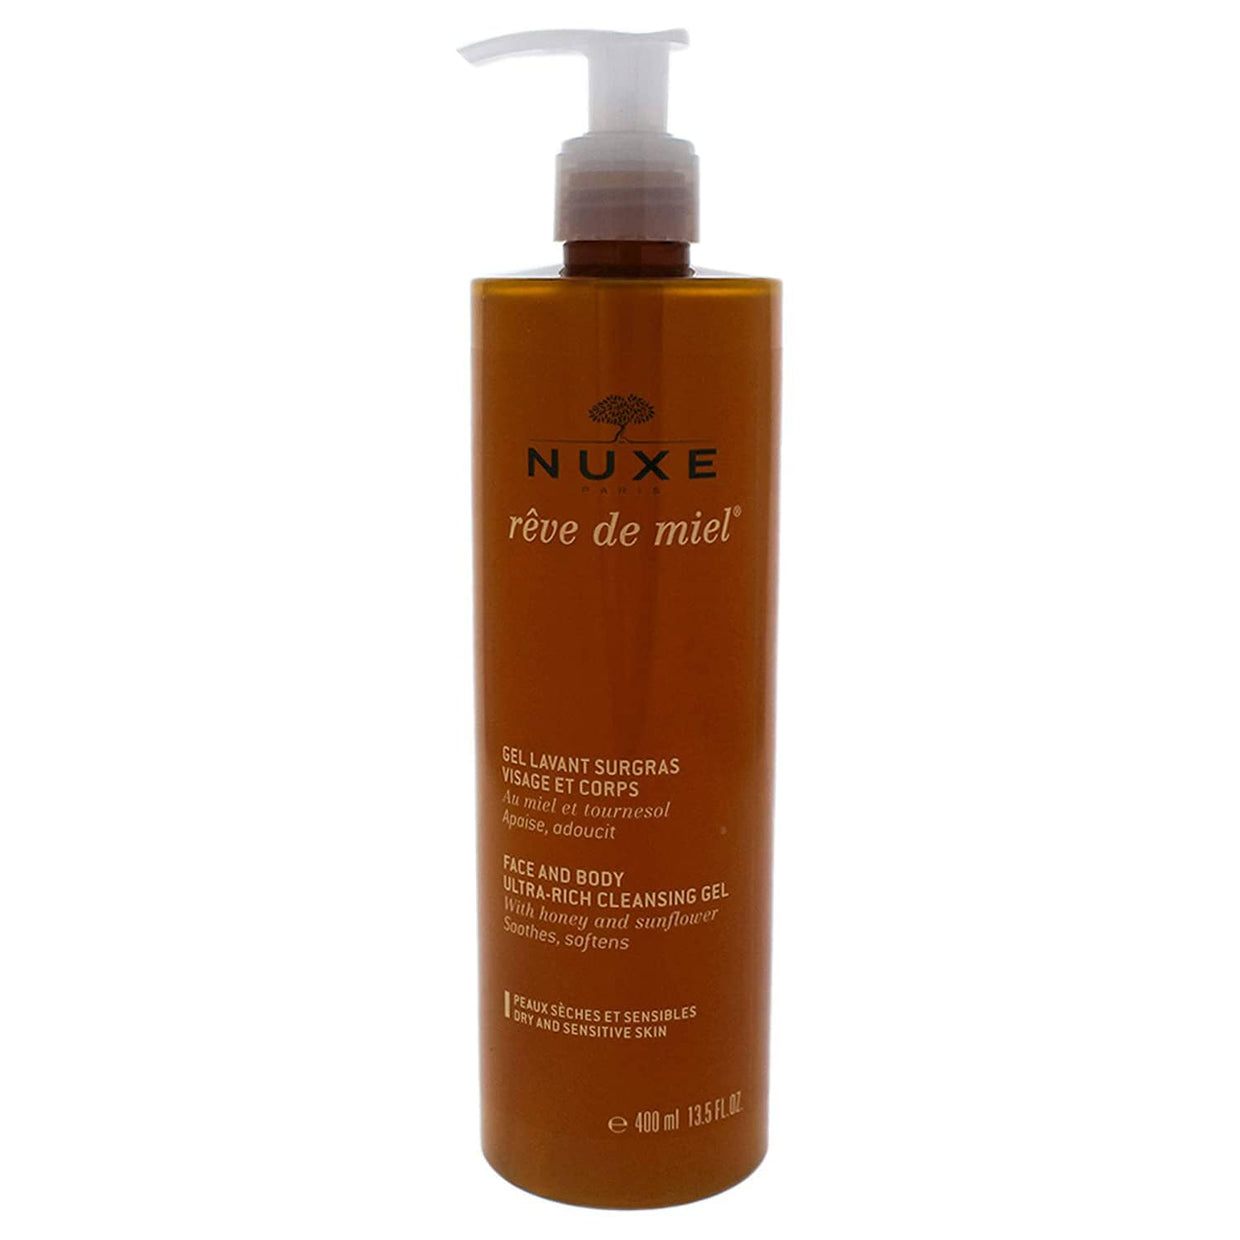 Nuxe Reve de Miel Face and Body Ultra Rich Cleansing Gel Nuxe 13.5 fl. oz (400 ml) Shop at Exclusive Beauty Club